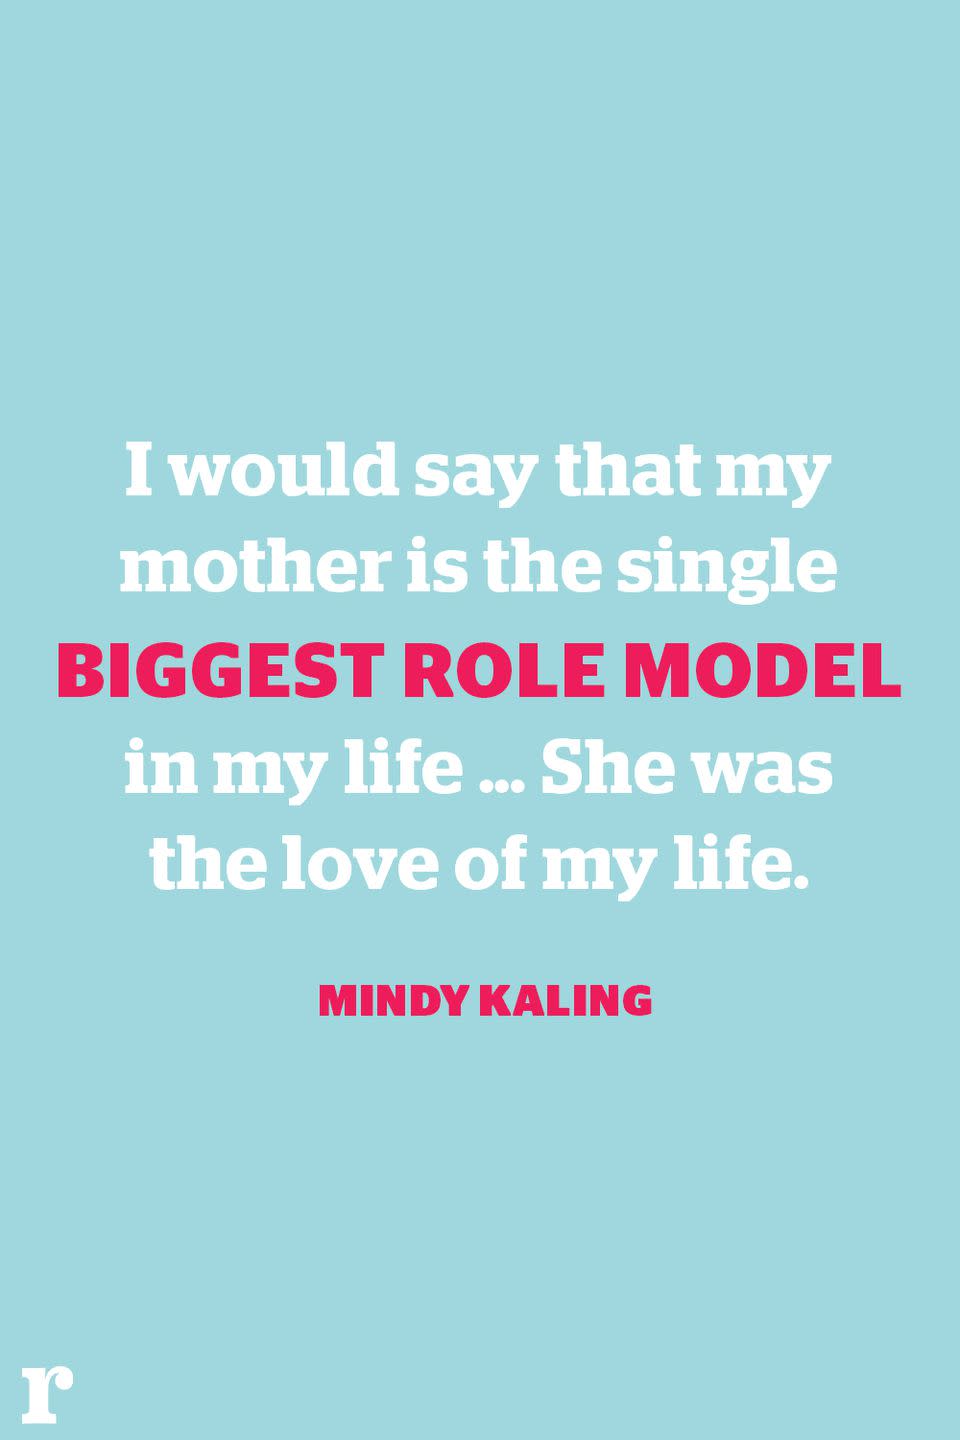 <p>"I would say that my mother is the single biggest role model in my life... She was the love of my life." </p><p><em> - Mindy Kaling</em></p>